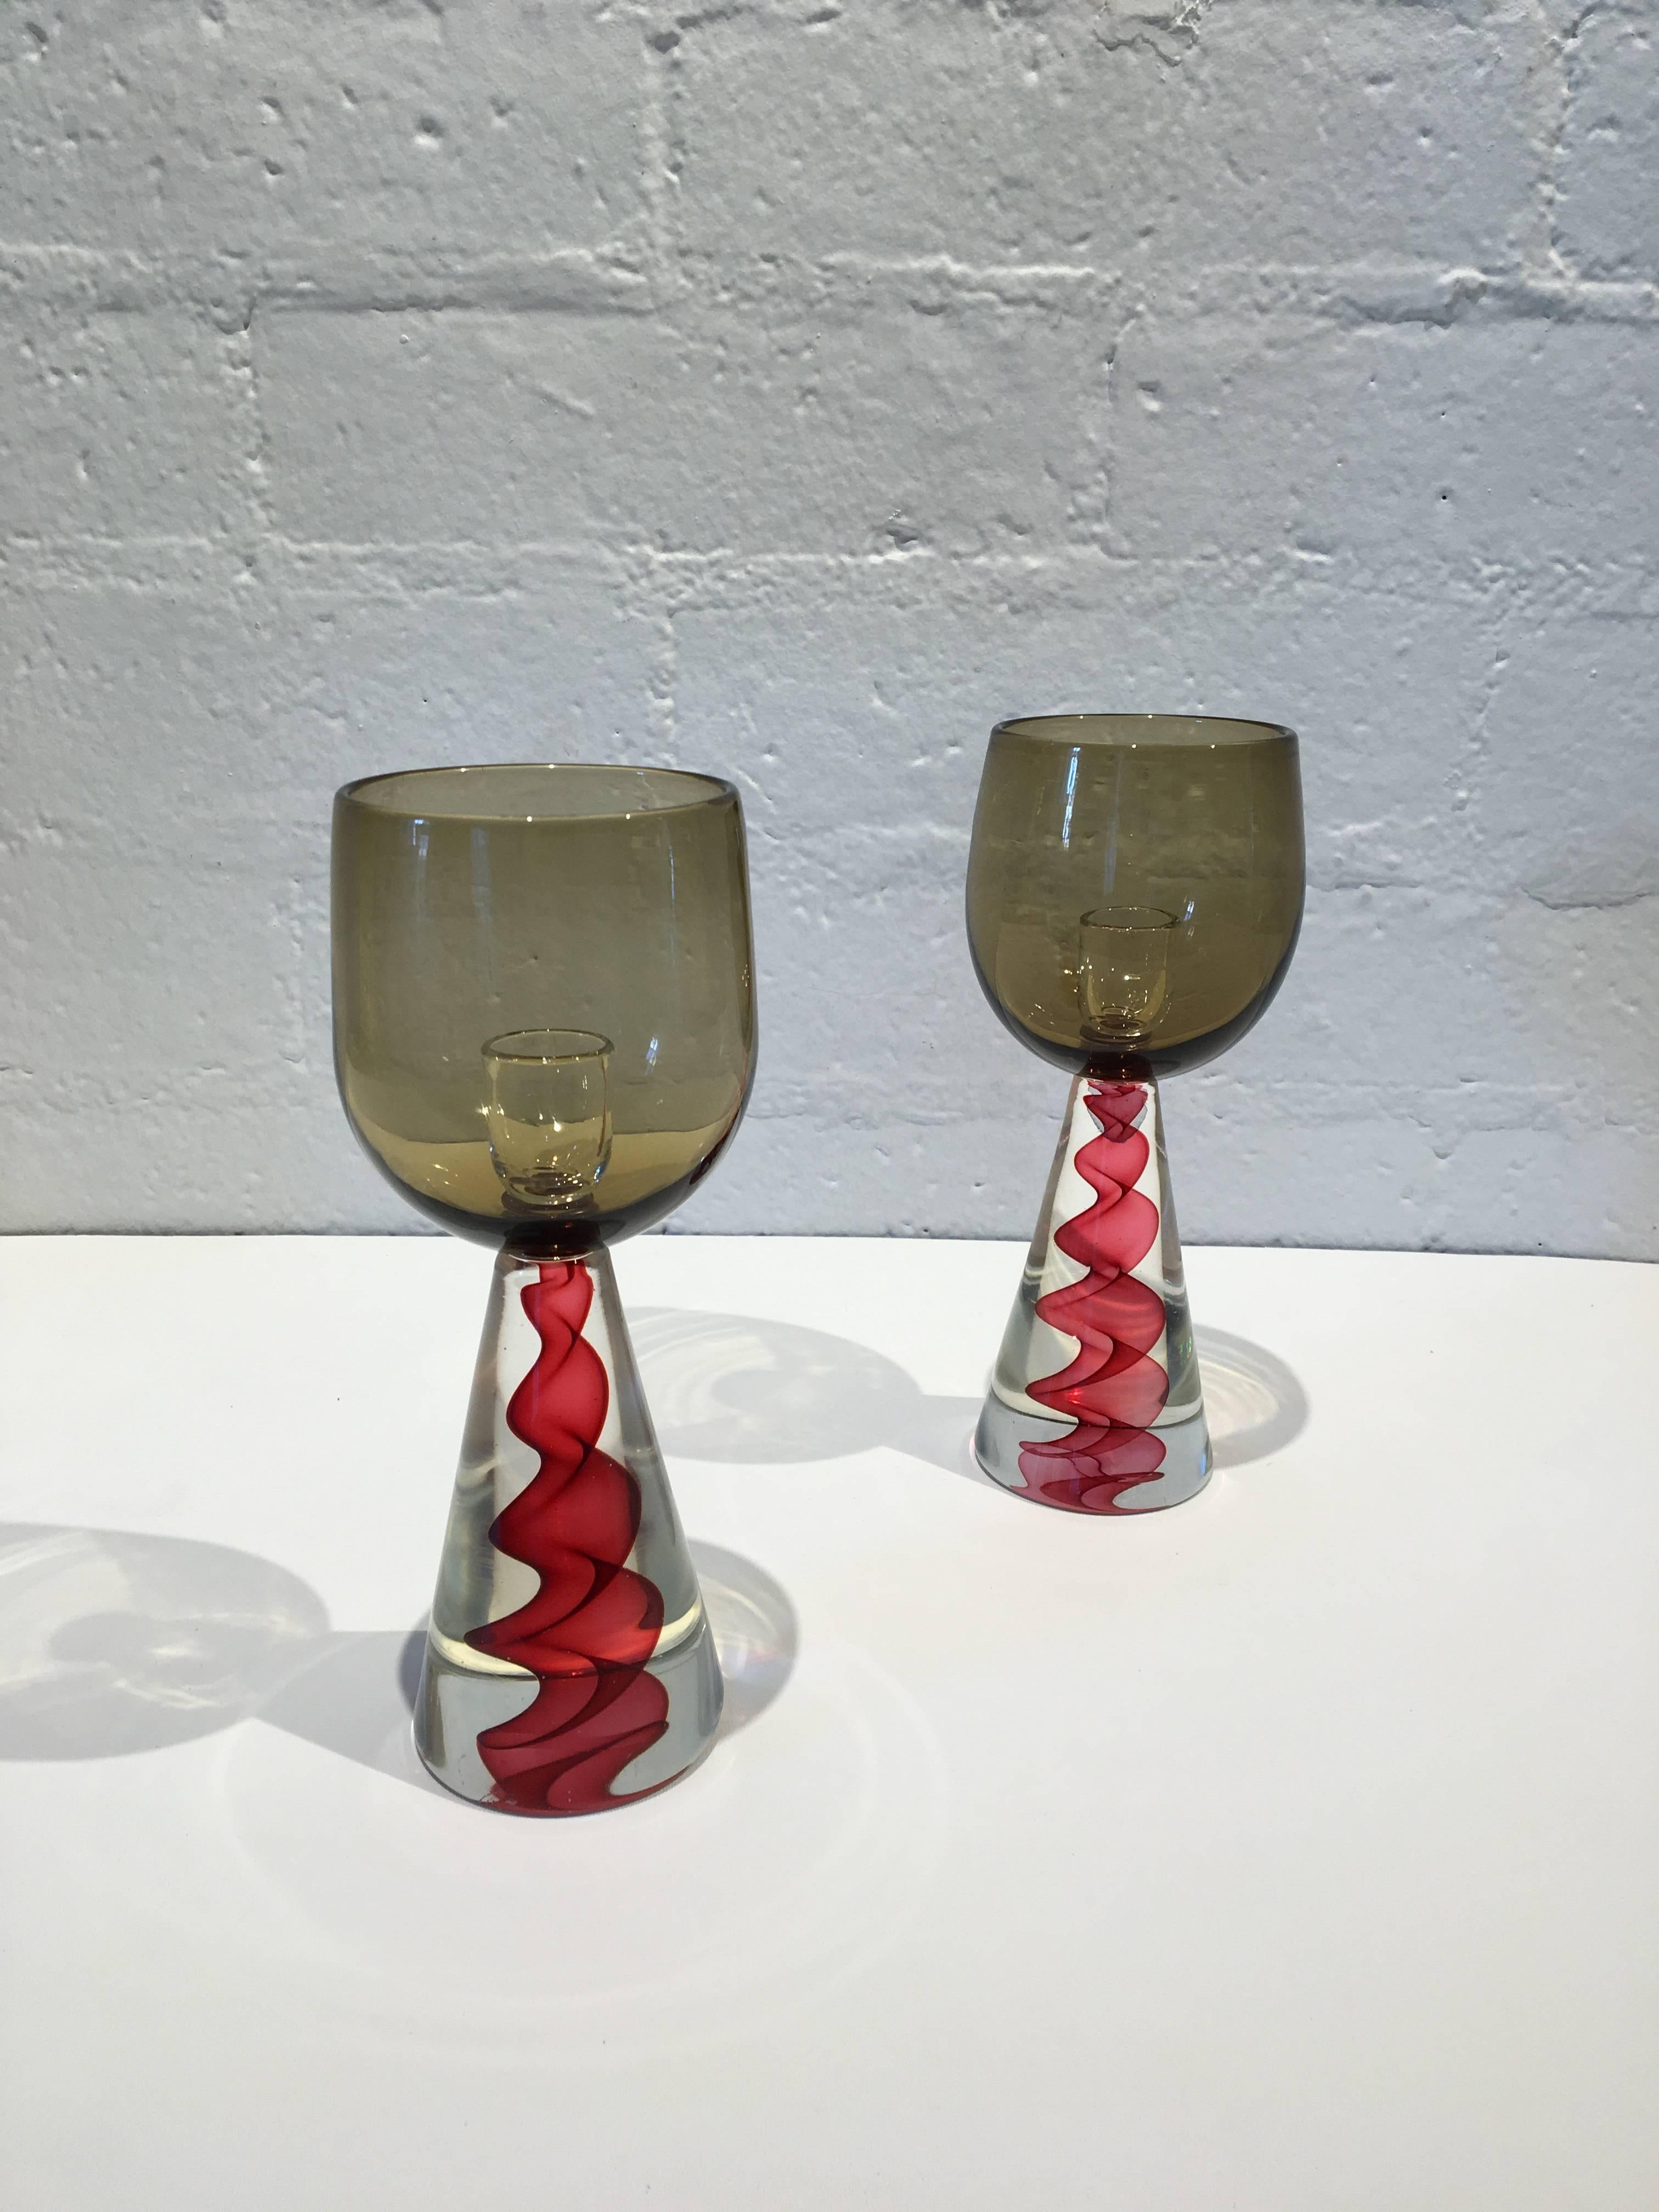 A pair of 1970s Murano glass candlestick by Seguso.
This are very much like the ones that they designed for Tiffany & Co. But the labels were removed.